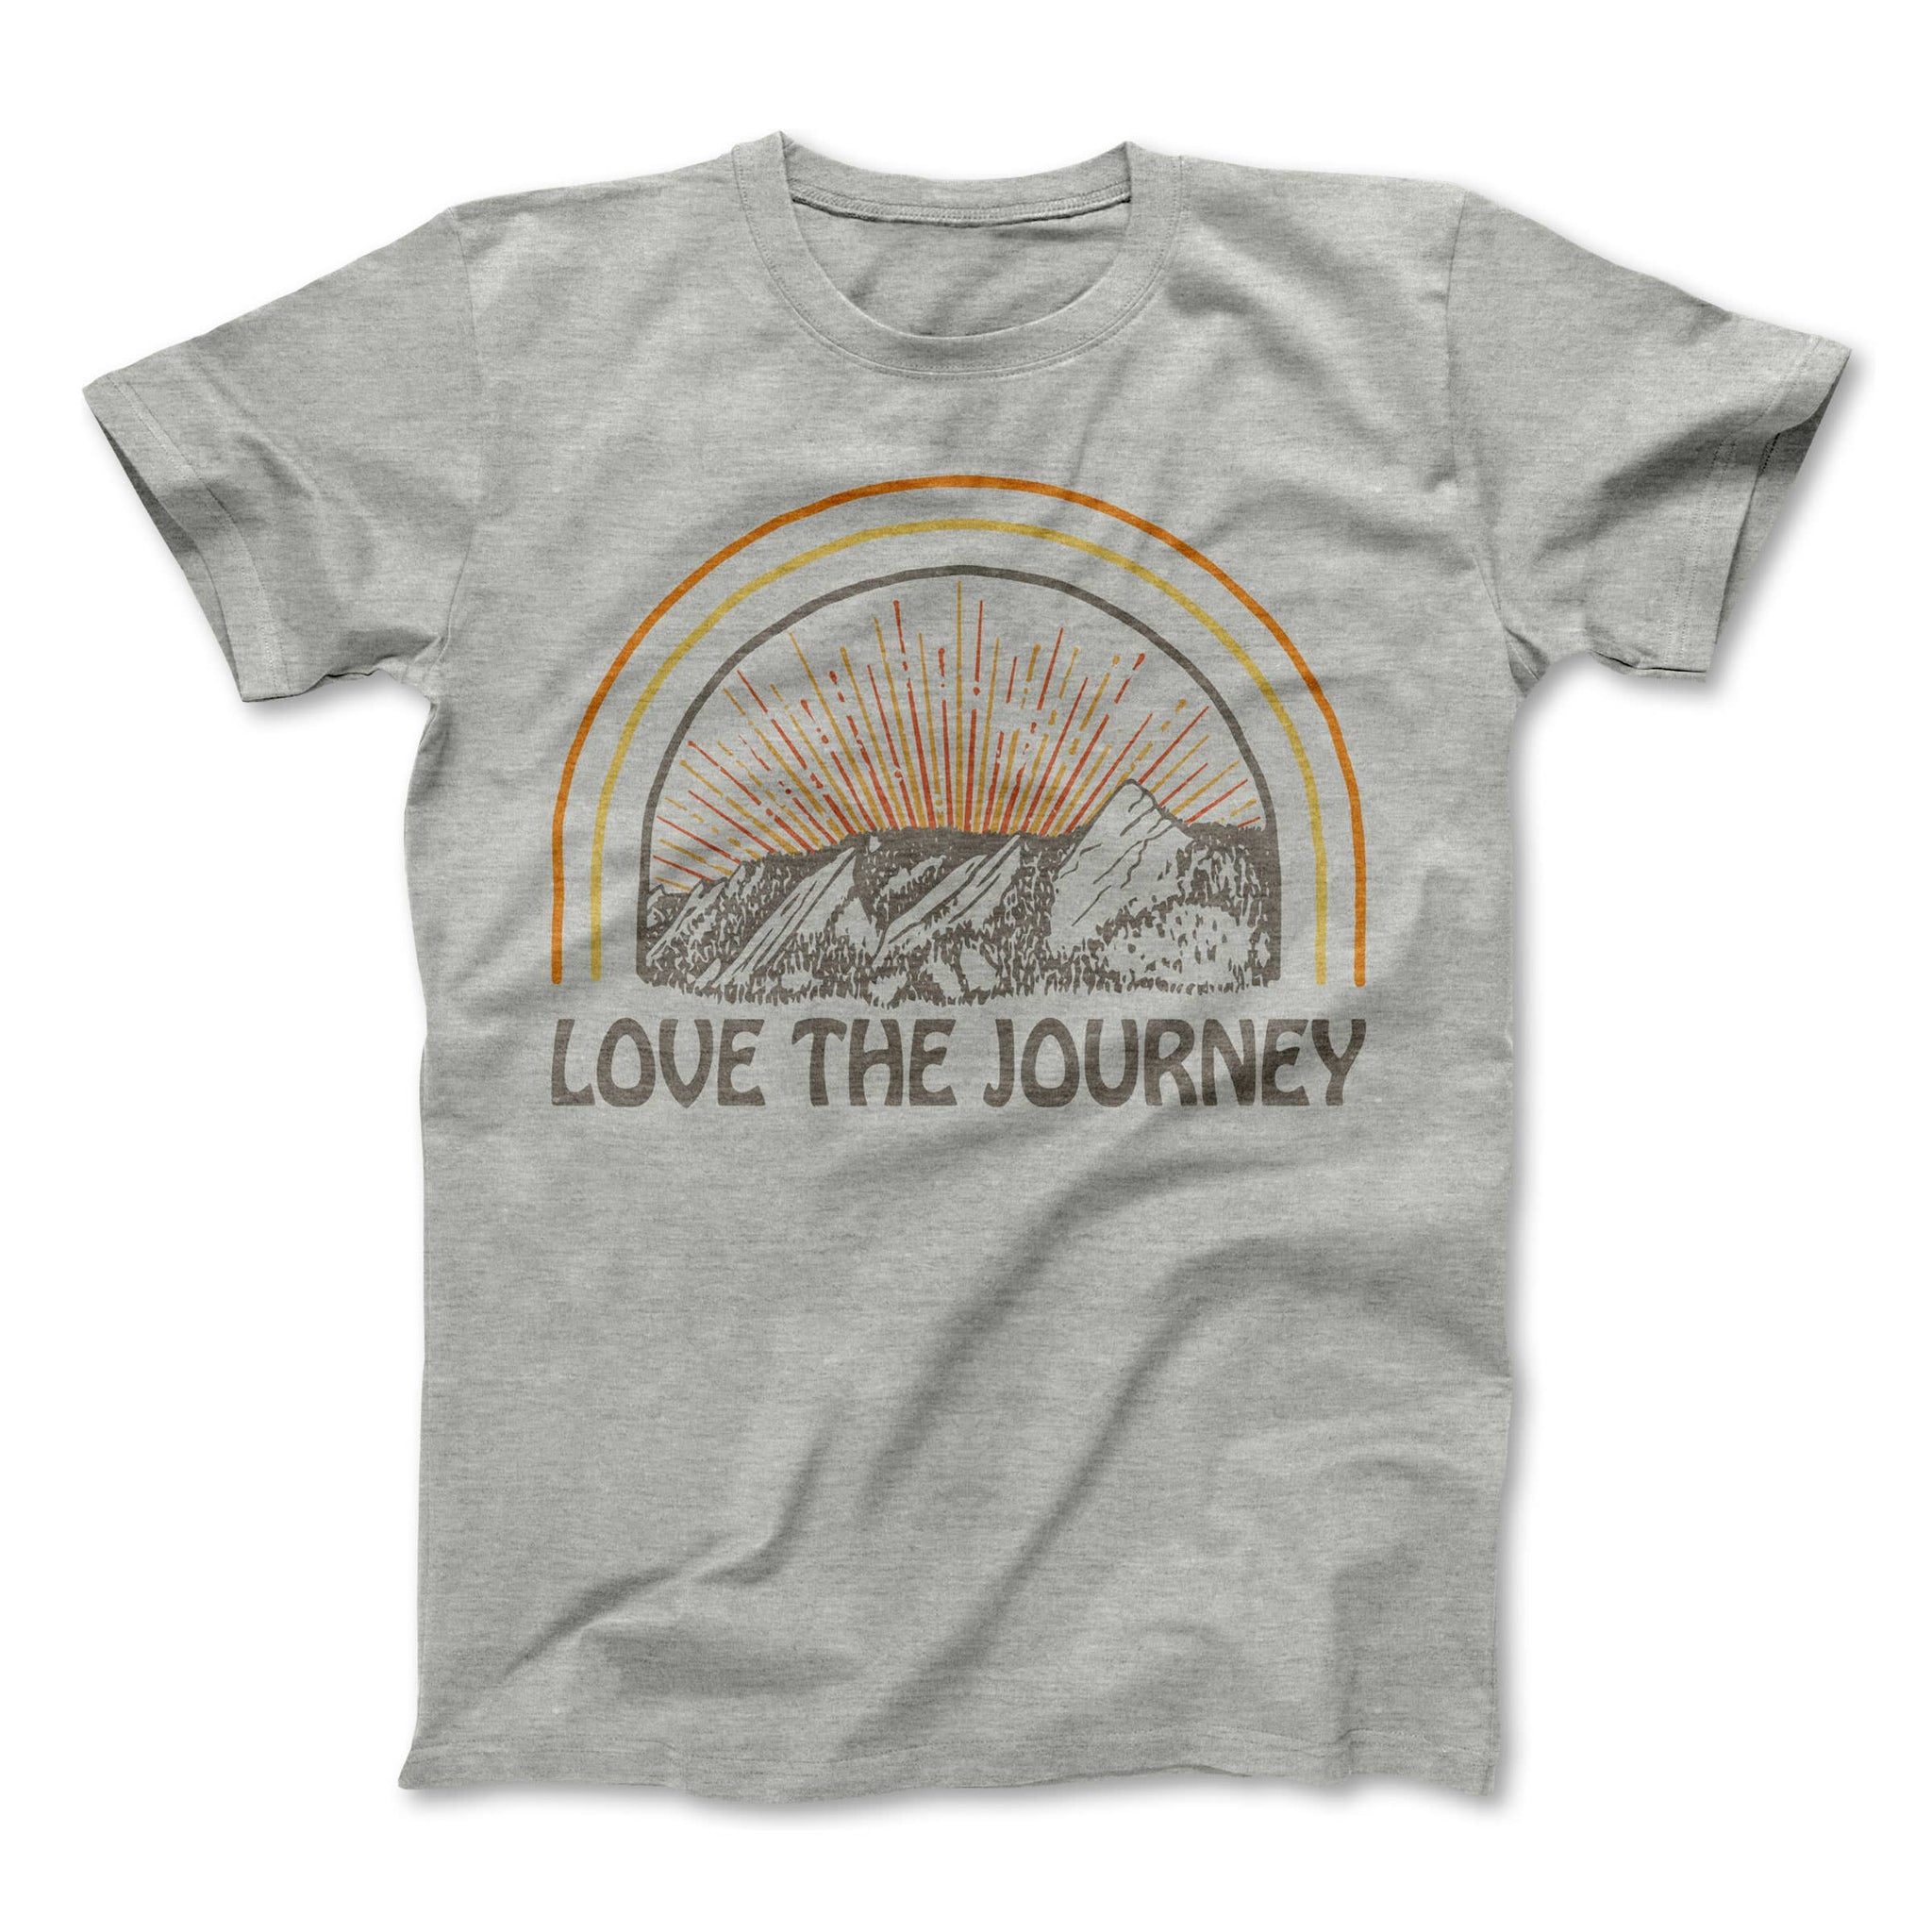 Love the Journey Tee- Adult